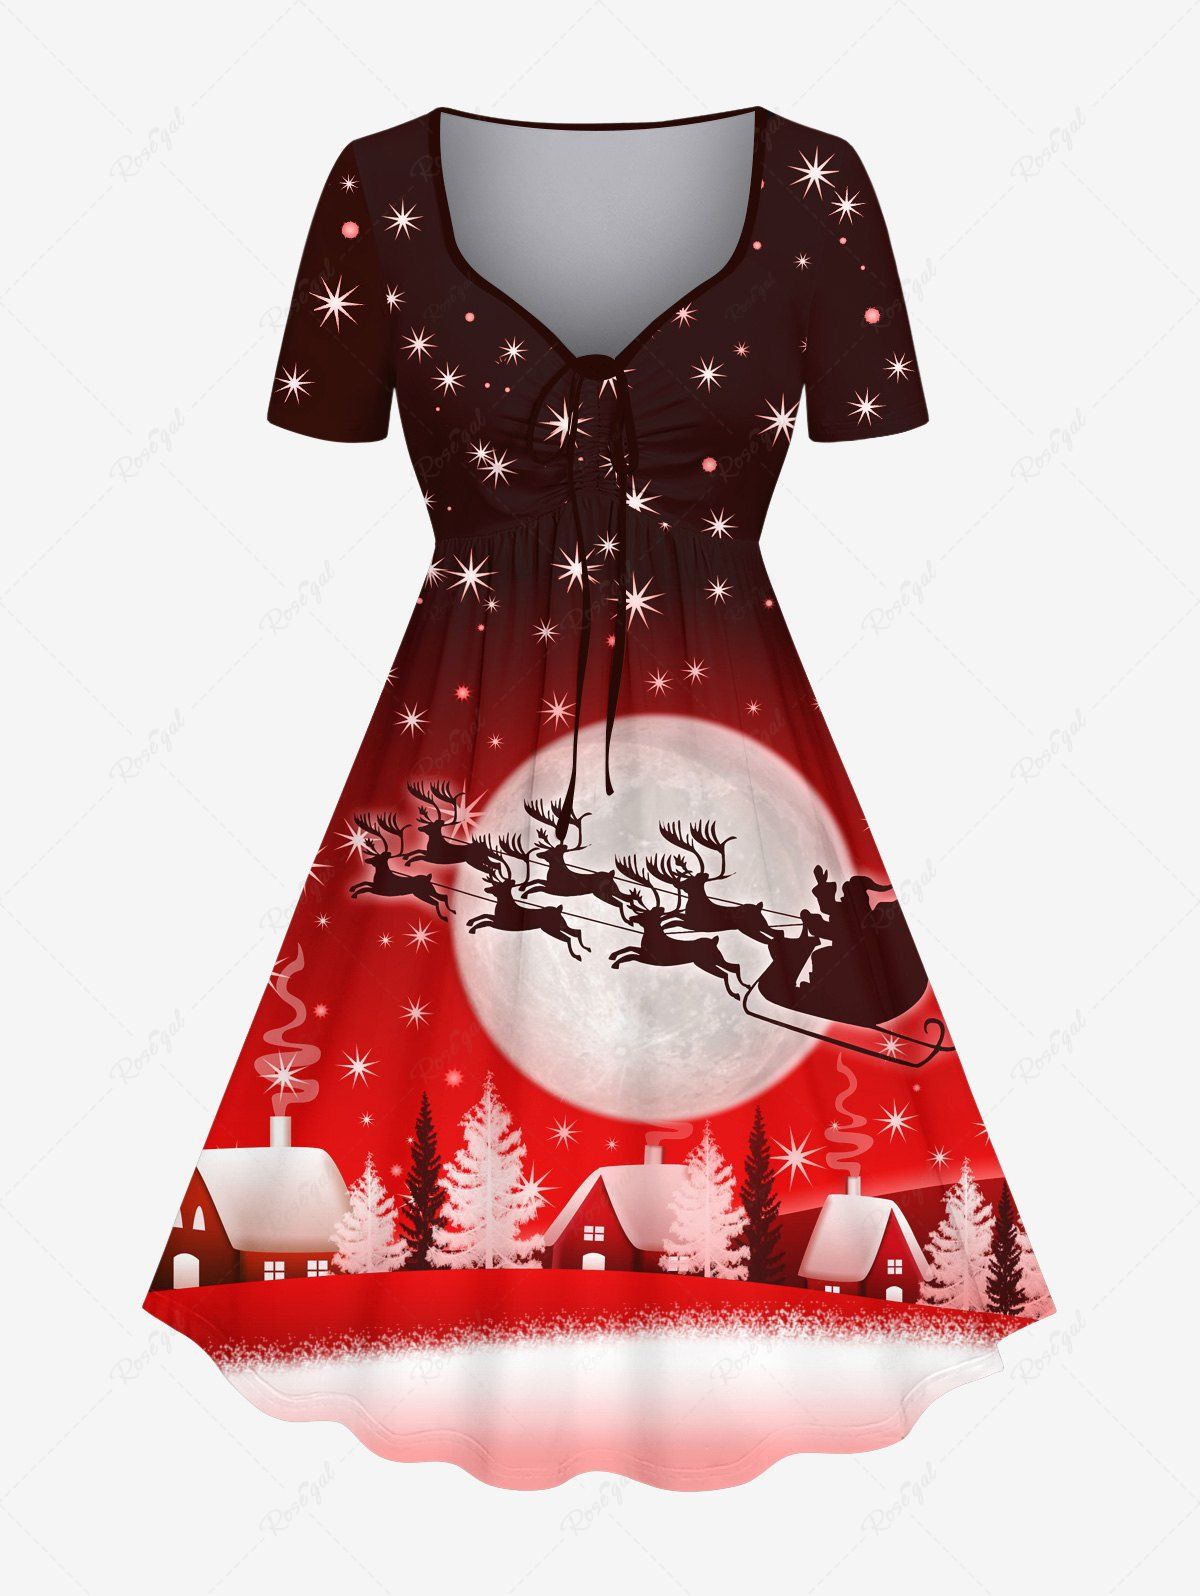 Outfit Plus Size Christmas Tree House Elk Santa Claus Sled Snowflake Moon Star Glitter 3D Print Cinched Dress  